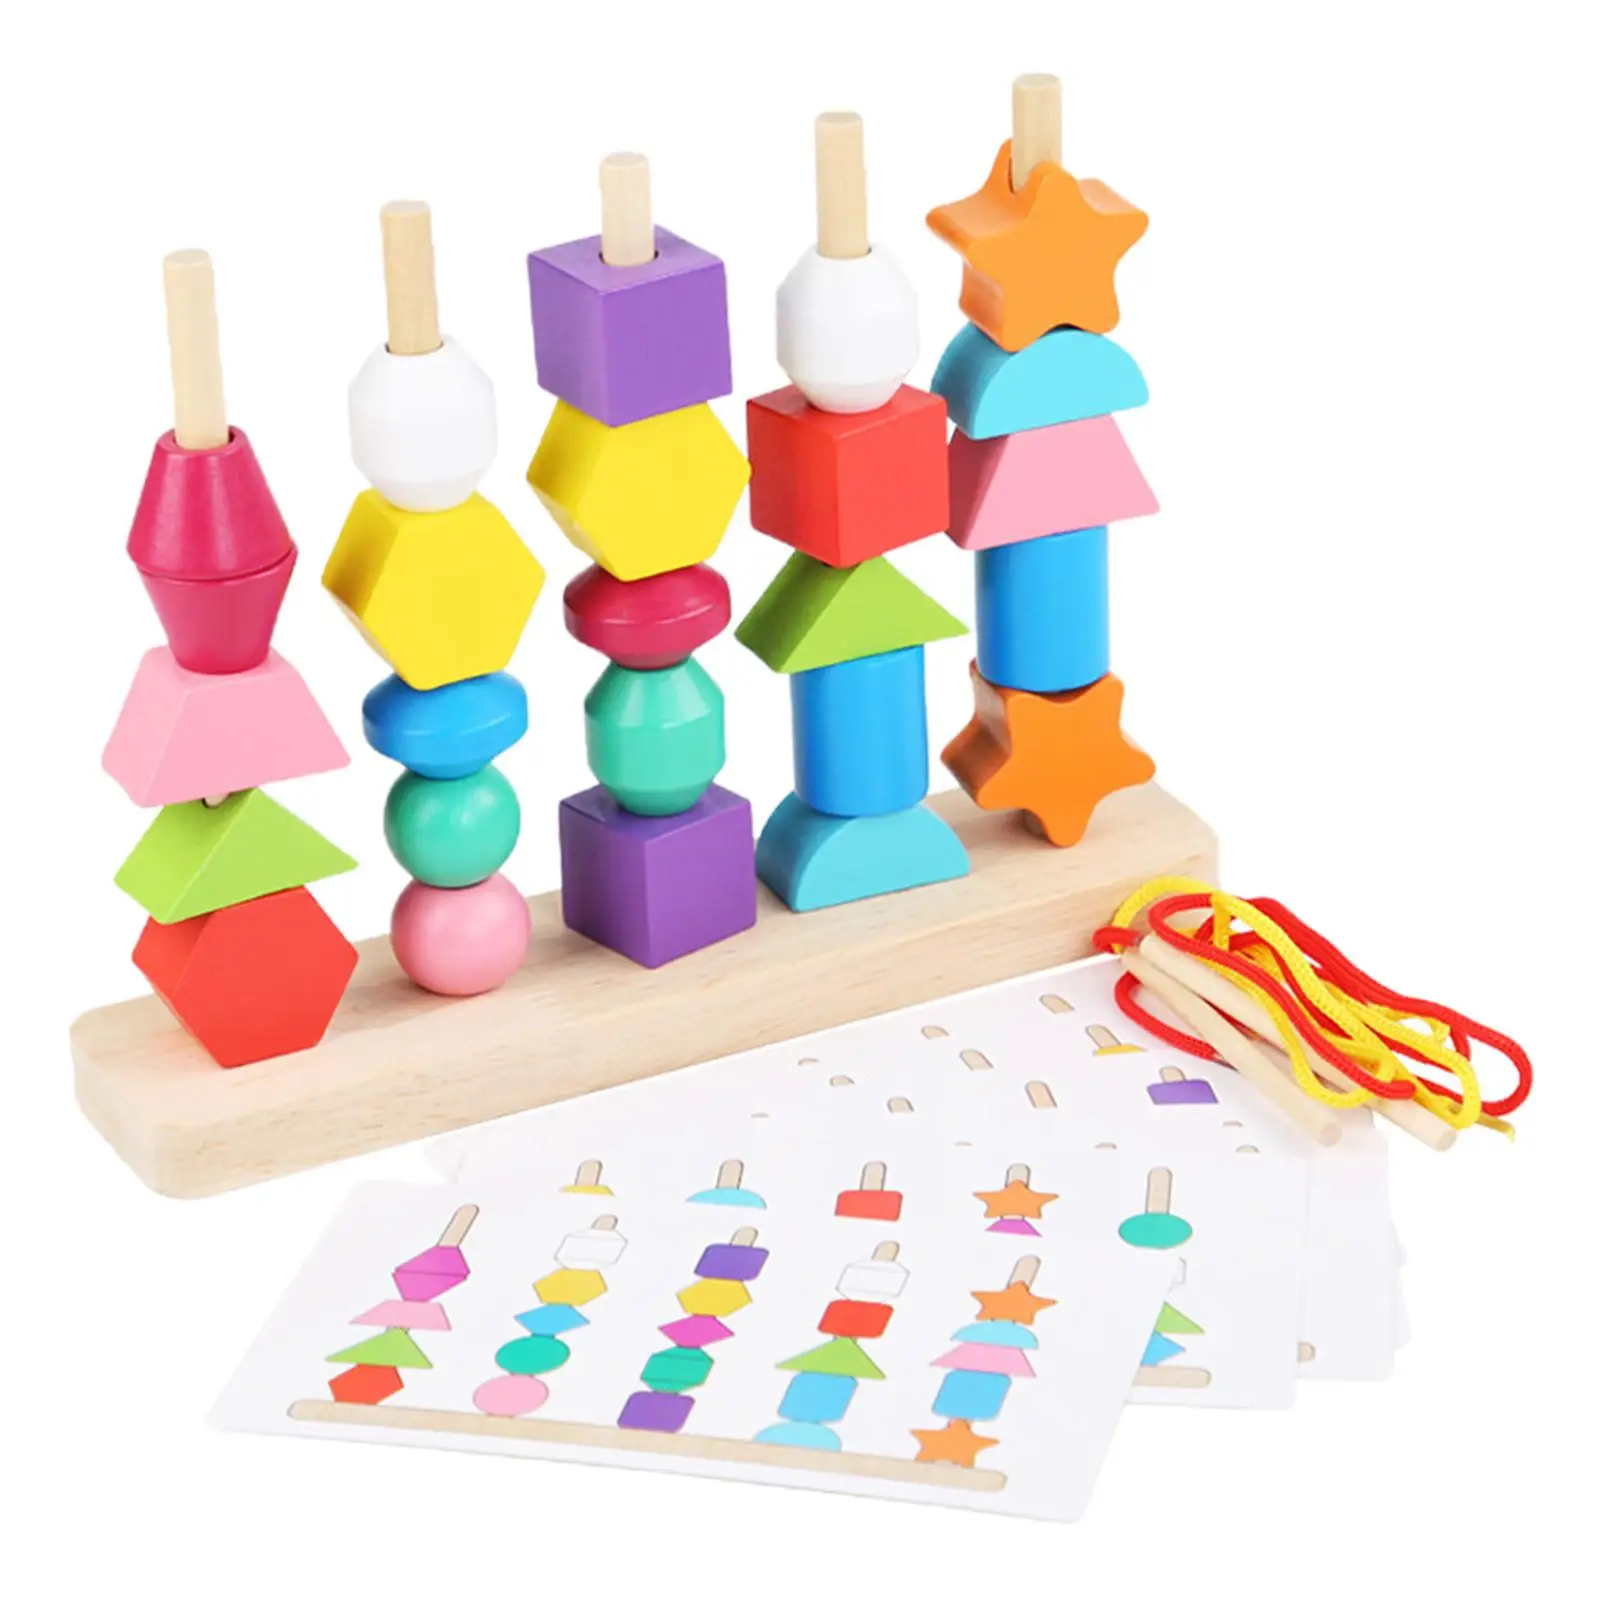 Five Sets Beaded Toys Blocks Educational Colorful Learning Wooden Sensory Toy Monterssori Toy for Toddlers Preschool Children